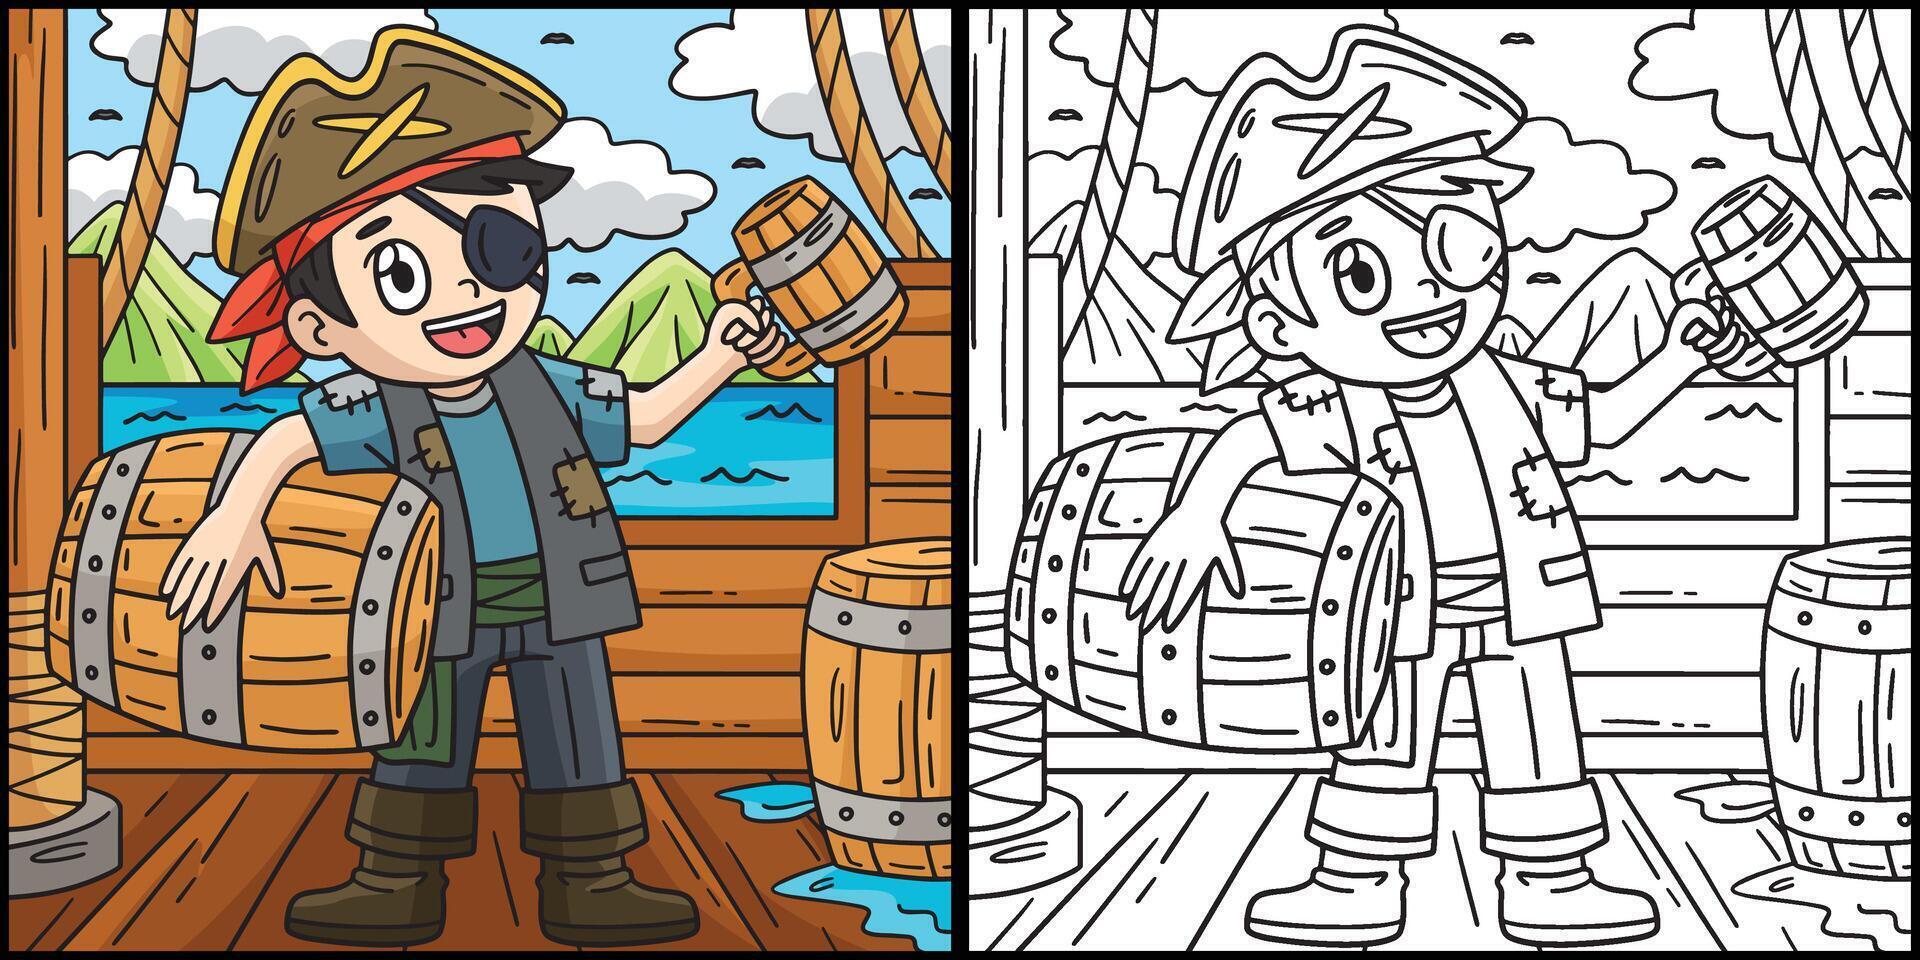 Pirate with a Barrel of Rum Coloring Illustration vector